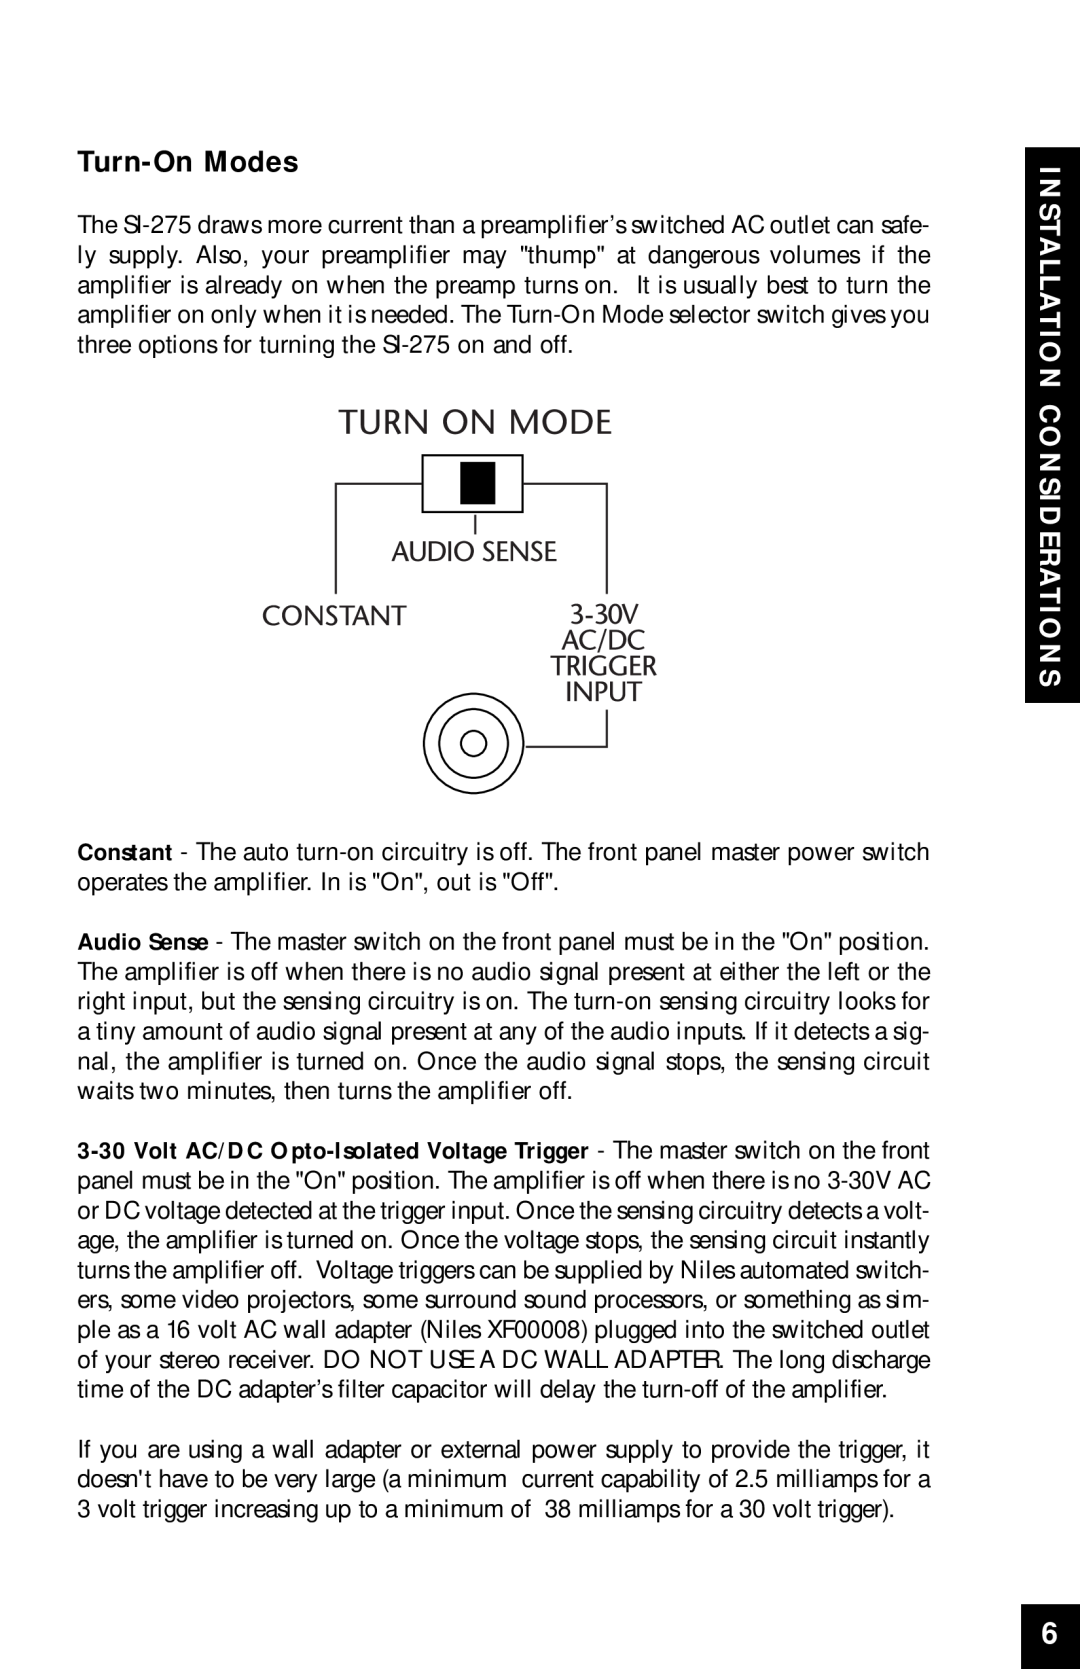 Niles Audio SI-275 manual Installation Considerations, Turn-OnModes 